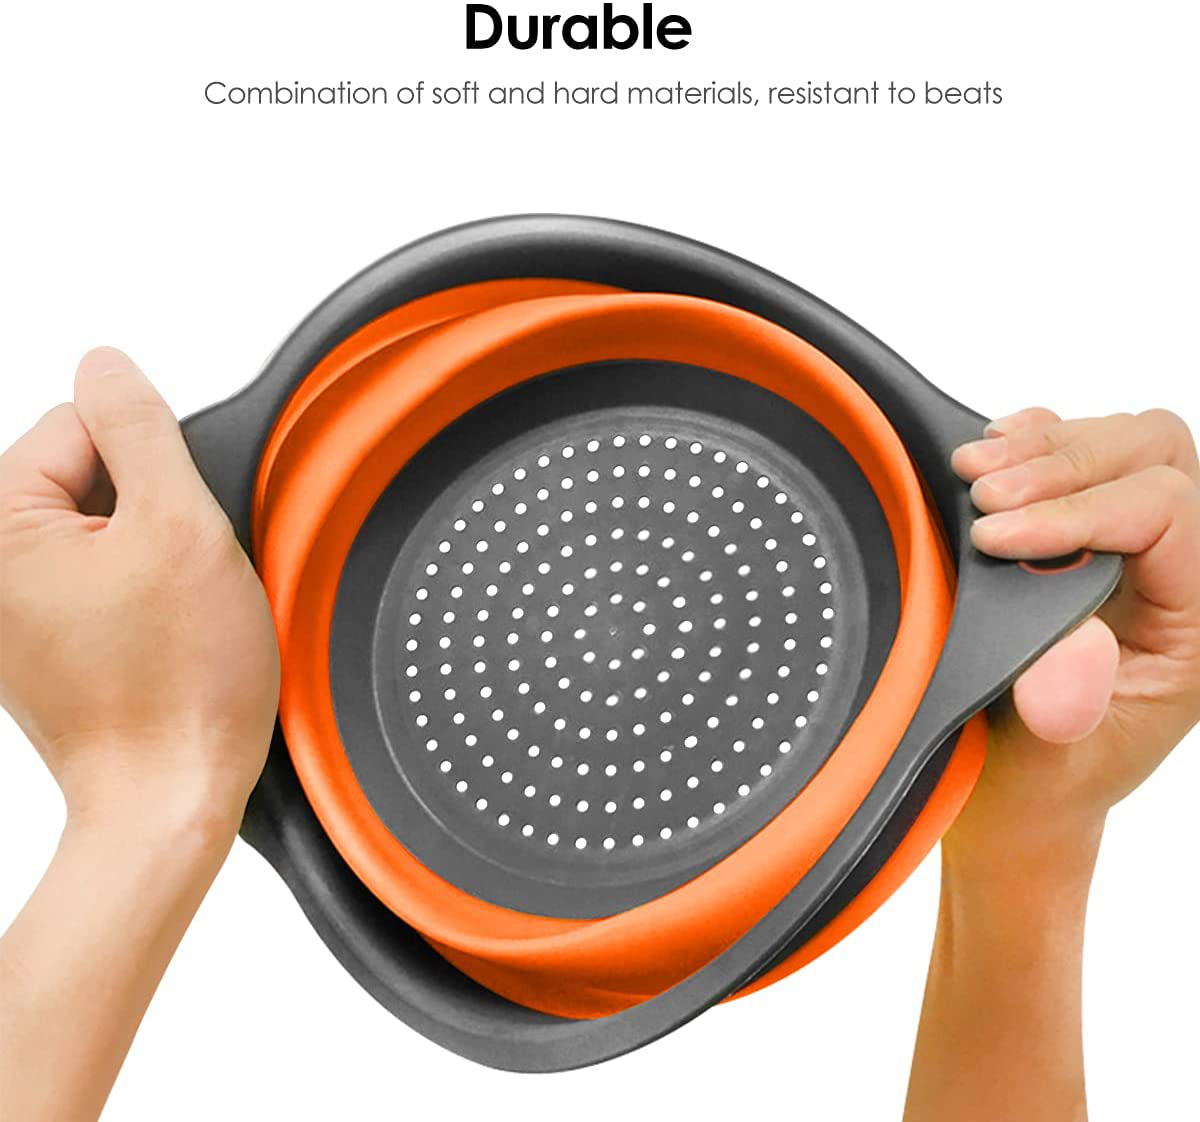 Longzon Collapsible Silicone Colanders and Strainers [2 Piece Set], Diameter Sizes 8'' -2 Quart and 9.5" -3 Quart, Pasta Vegetable/Fruit Kitchen Mesh Strainers with Extendable Handles Orange and Grey